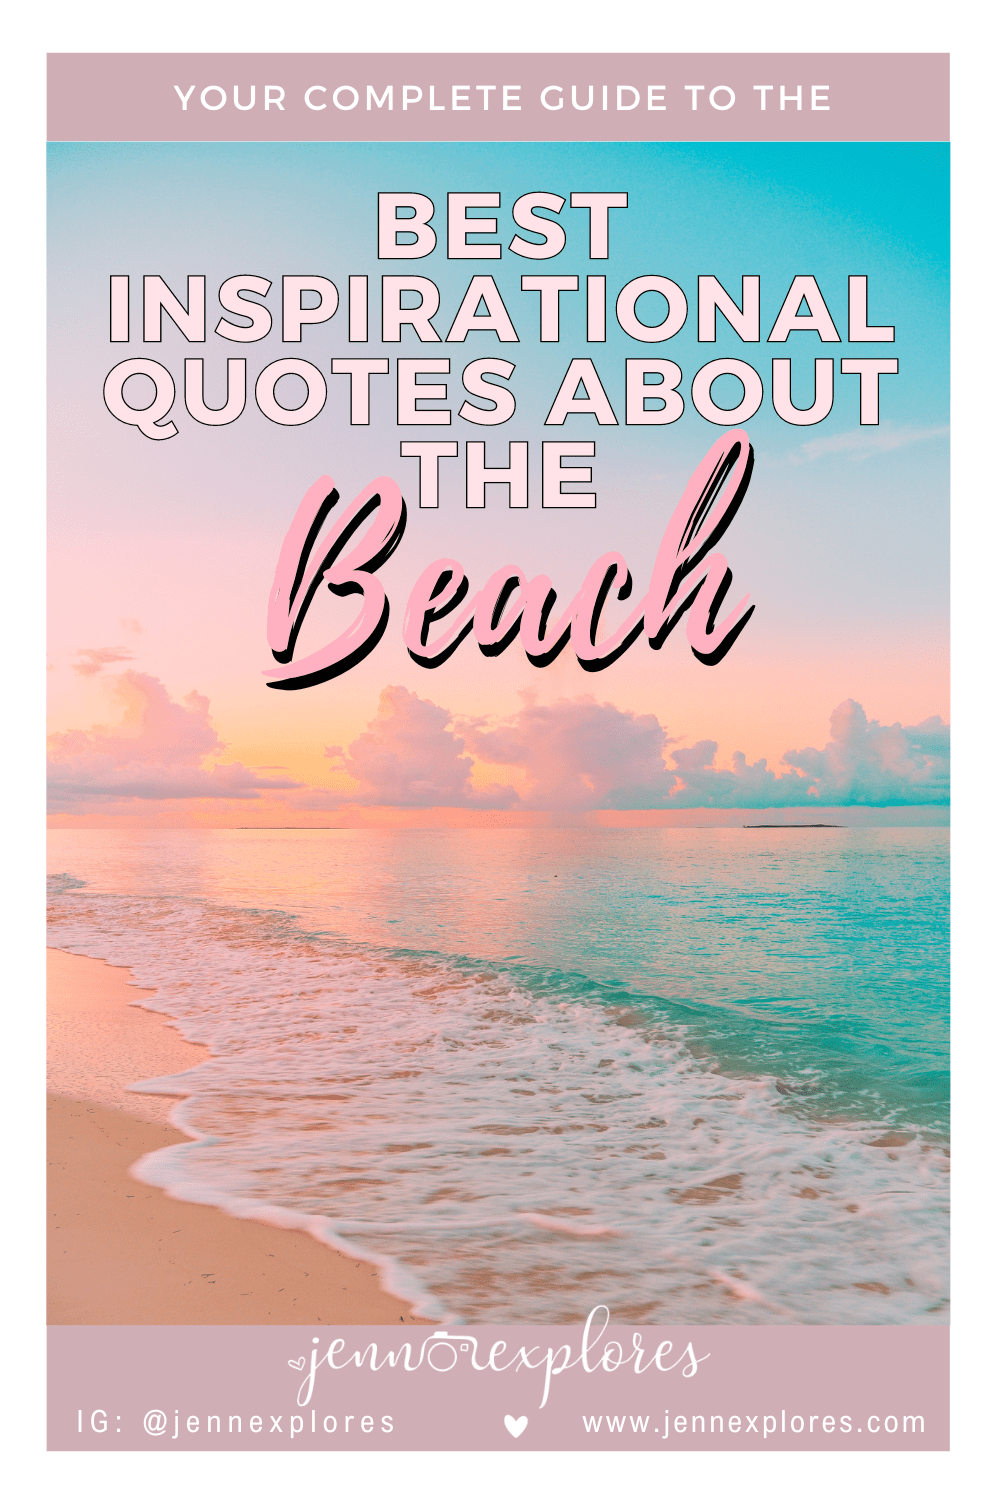 65 Beach Quotes & Captions That Feel Like A Vacation